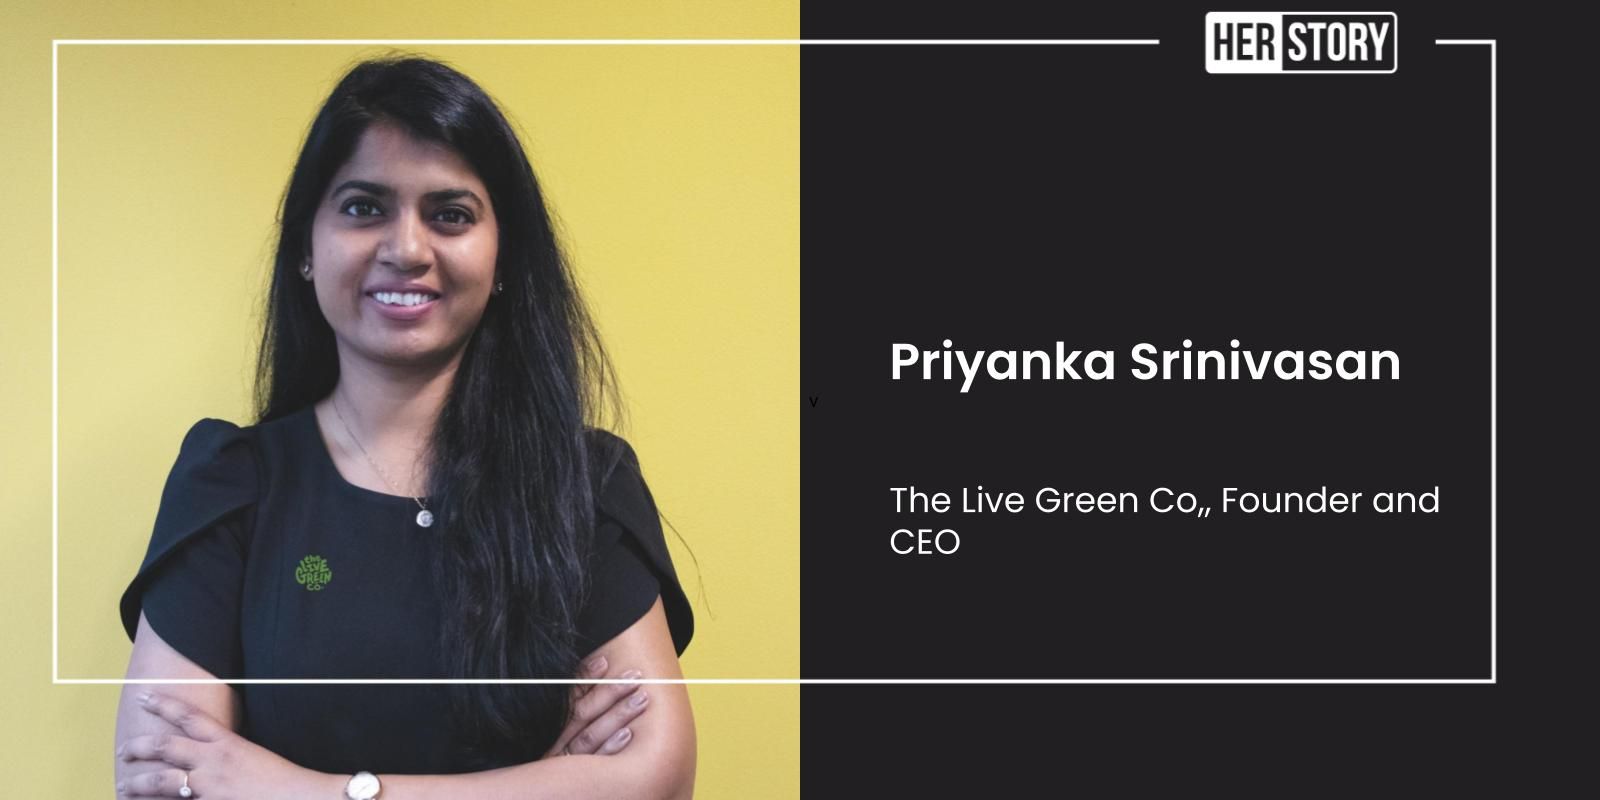 This woman entrepreneur’s startup aims to replace processed ingredients with natural ones using AI 